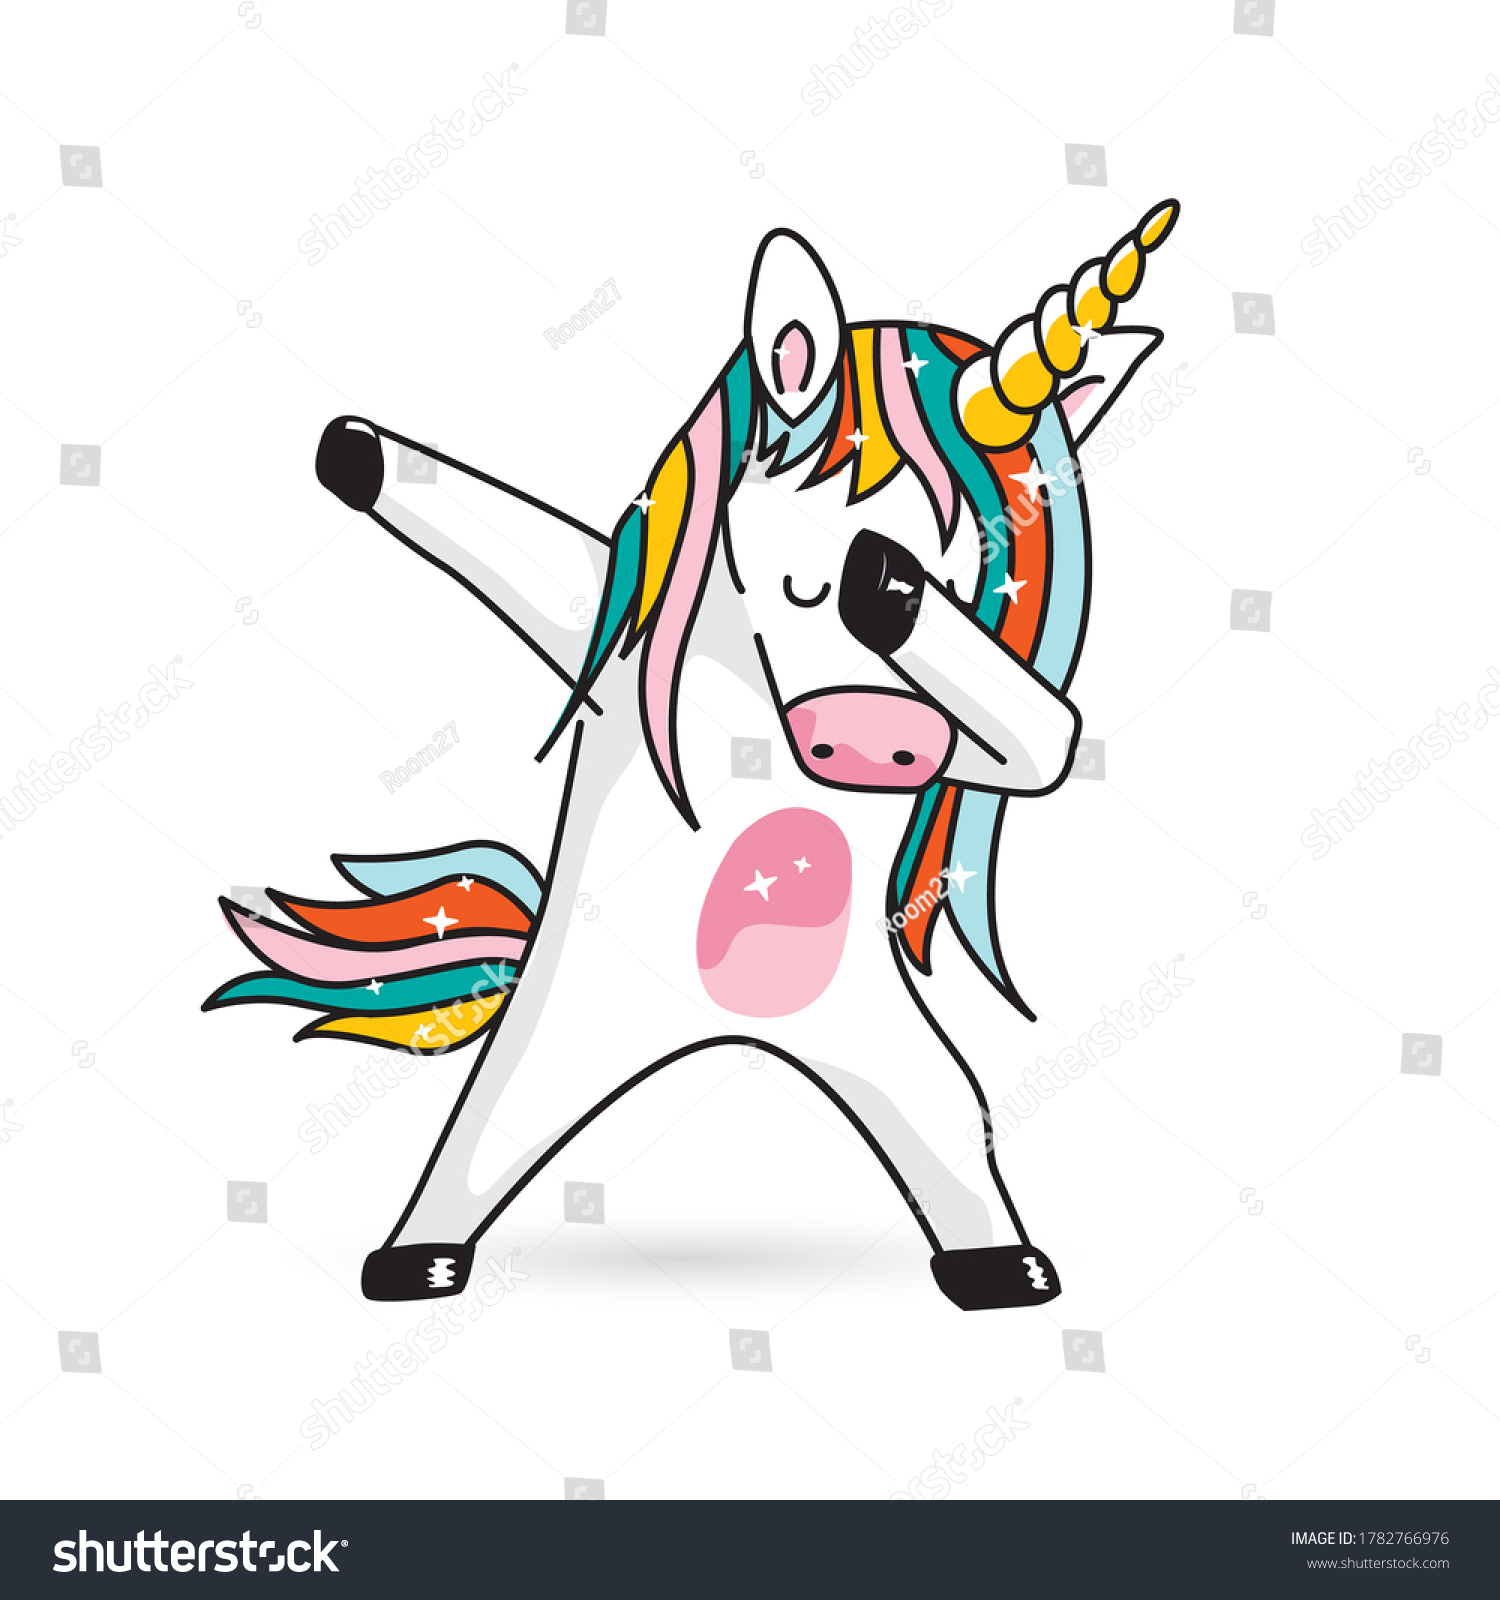 SVG of Funny unicorn doing the dab dance move, pastel colors vector design svg